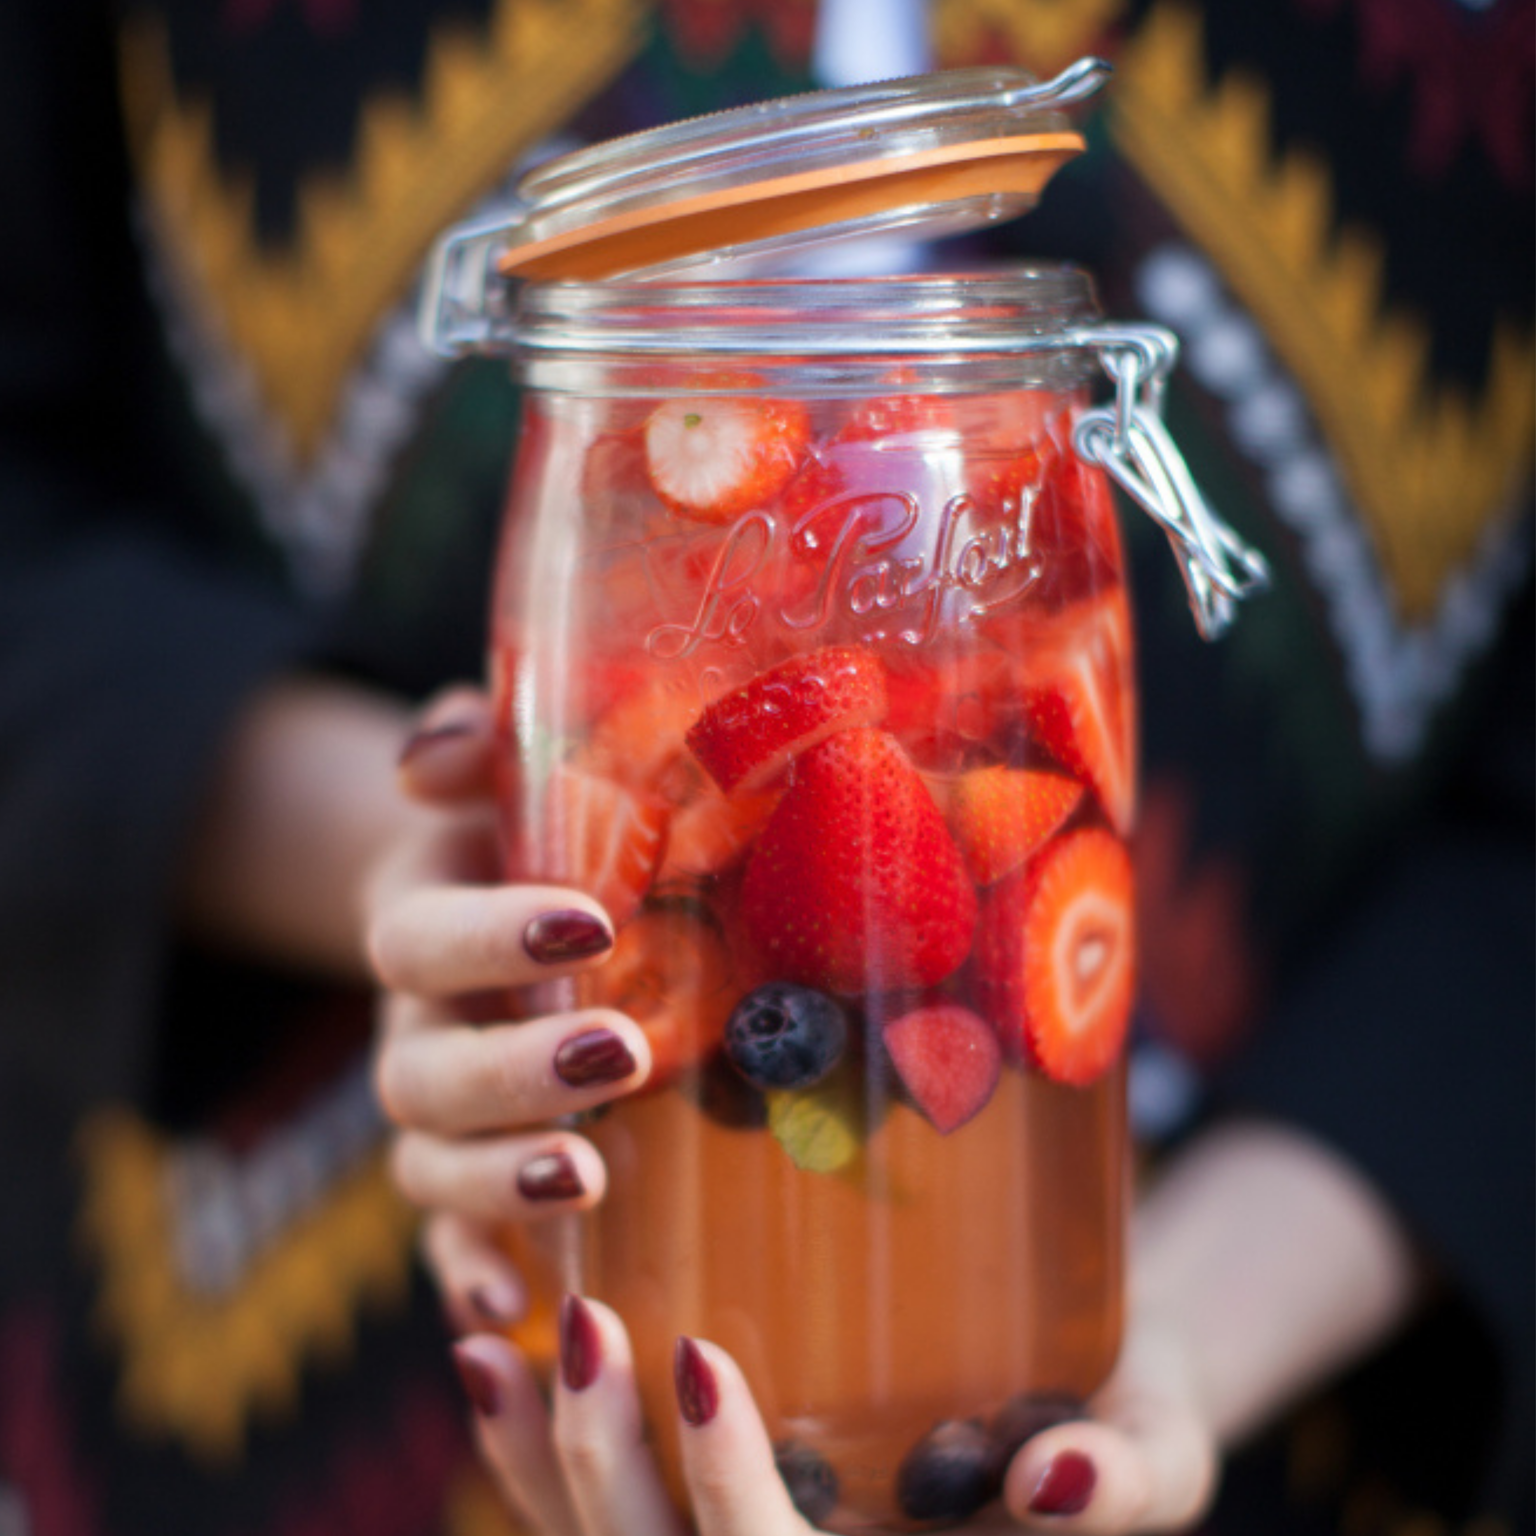 Image of a woman holding Le Parfait Glass Storage with berries and liquid inside.